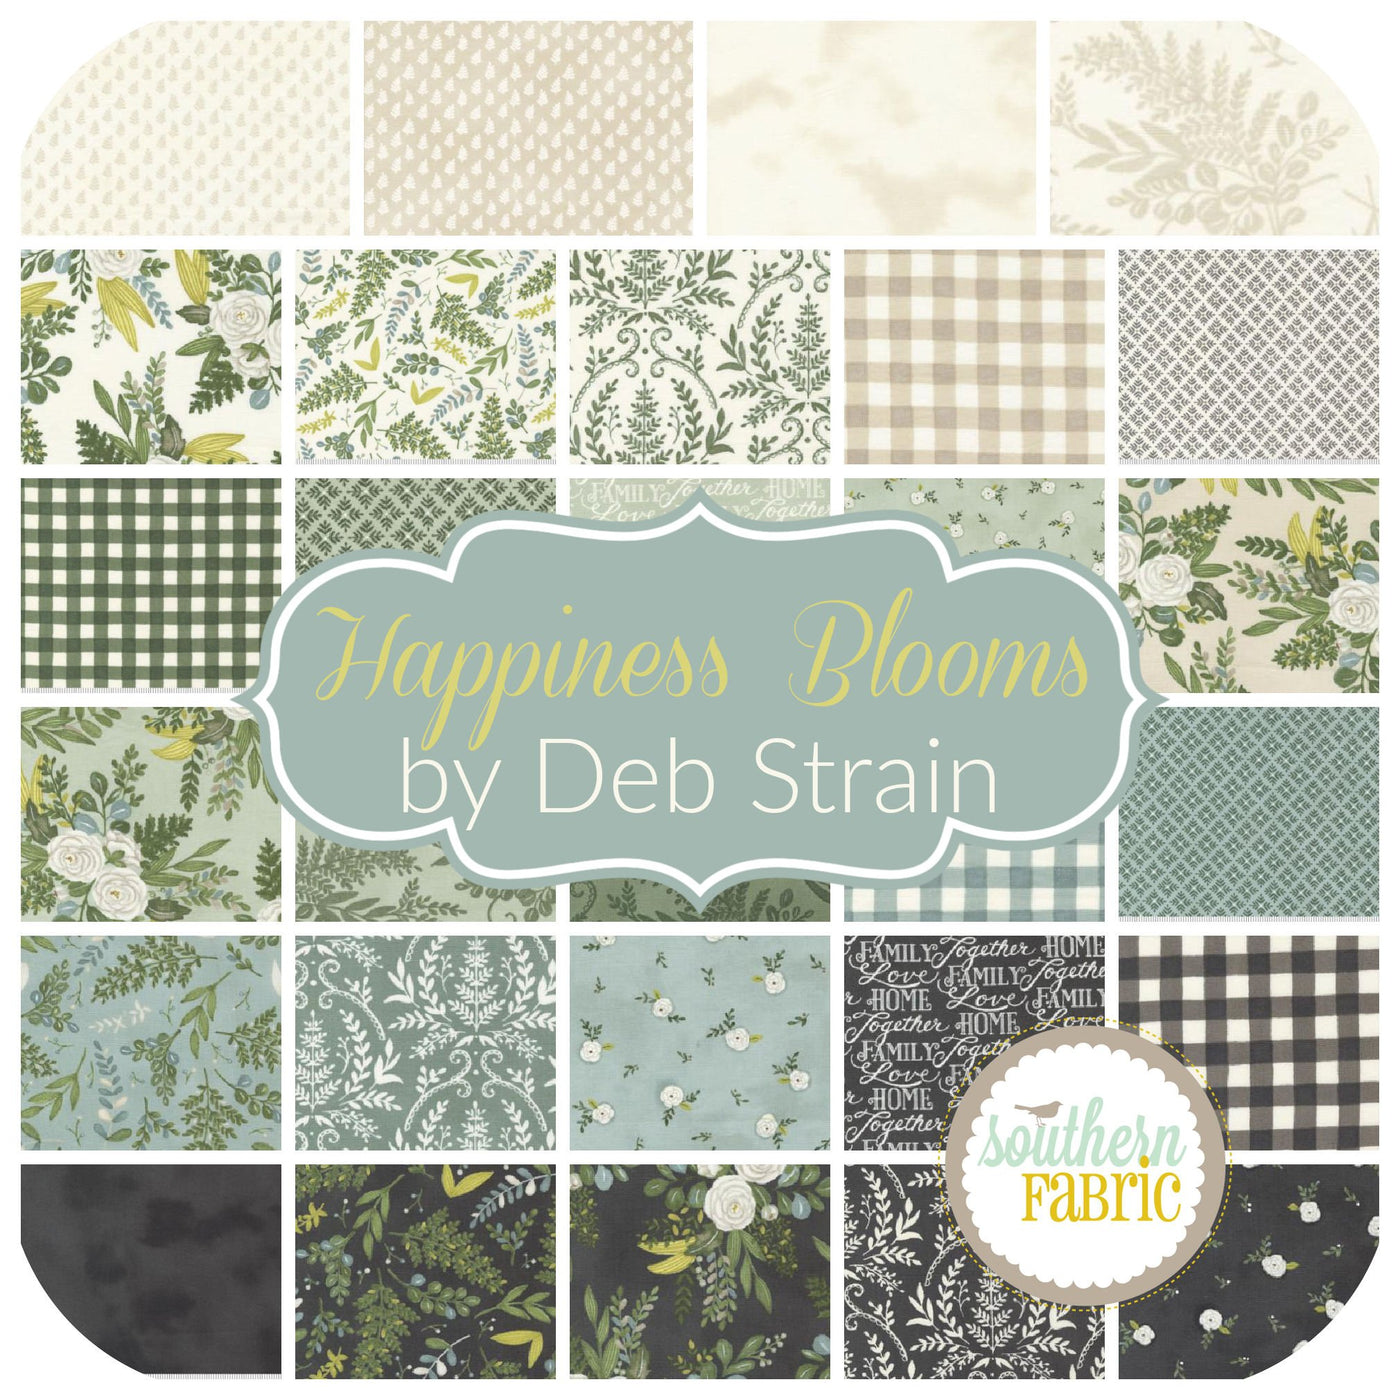 Happiness Blooms Fat Quarter Bundle (35 pcs) by Deb Strain for Moda (56050AB)